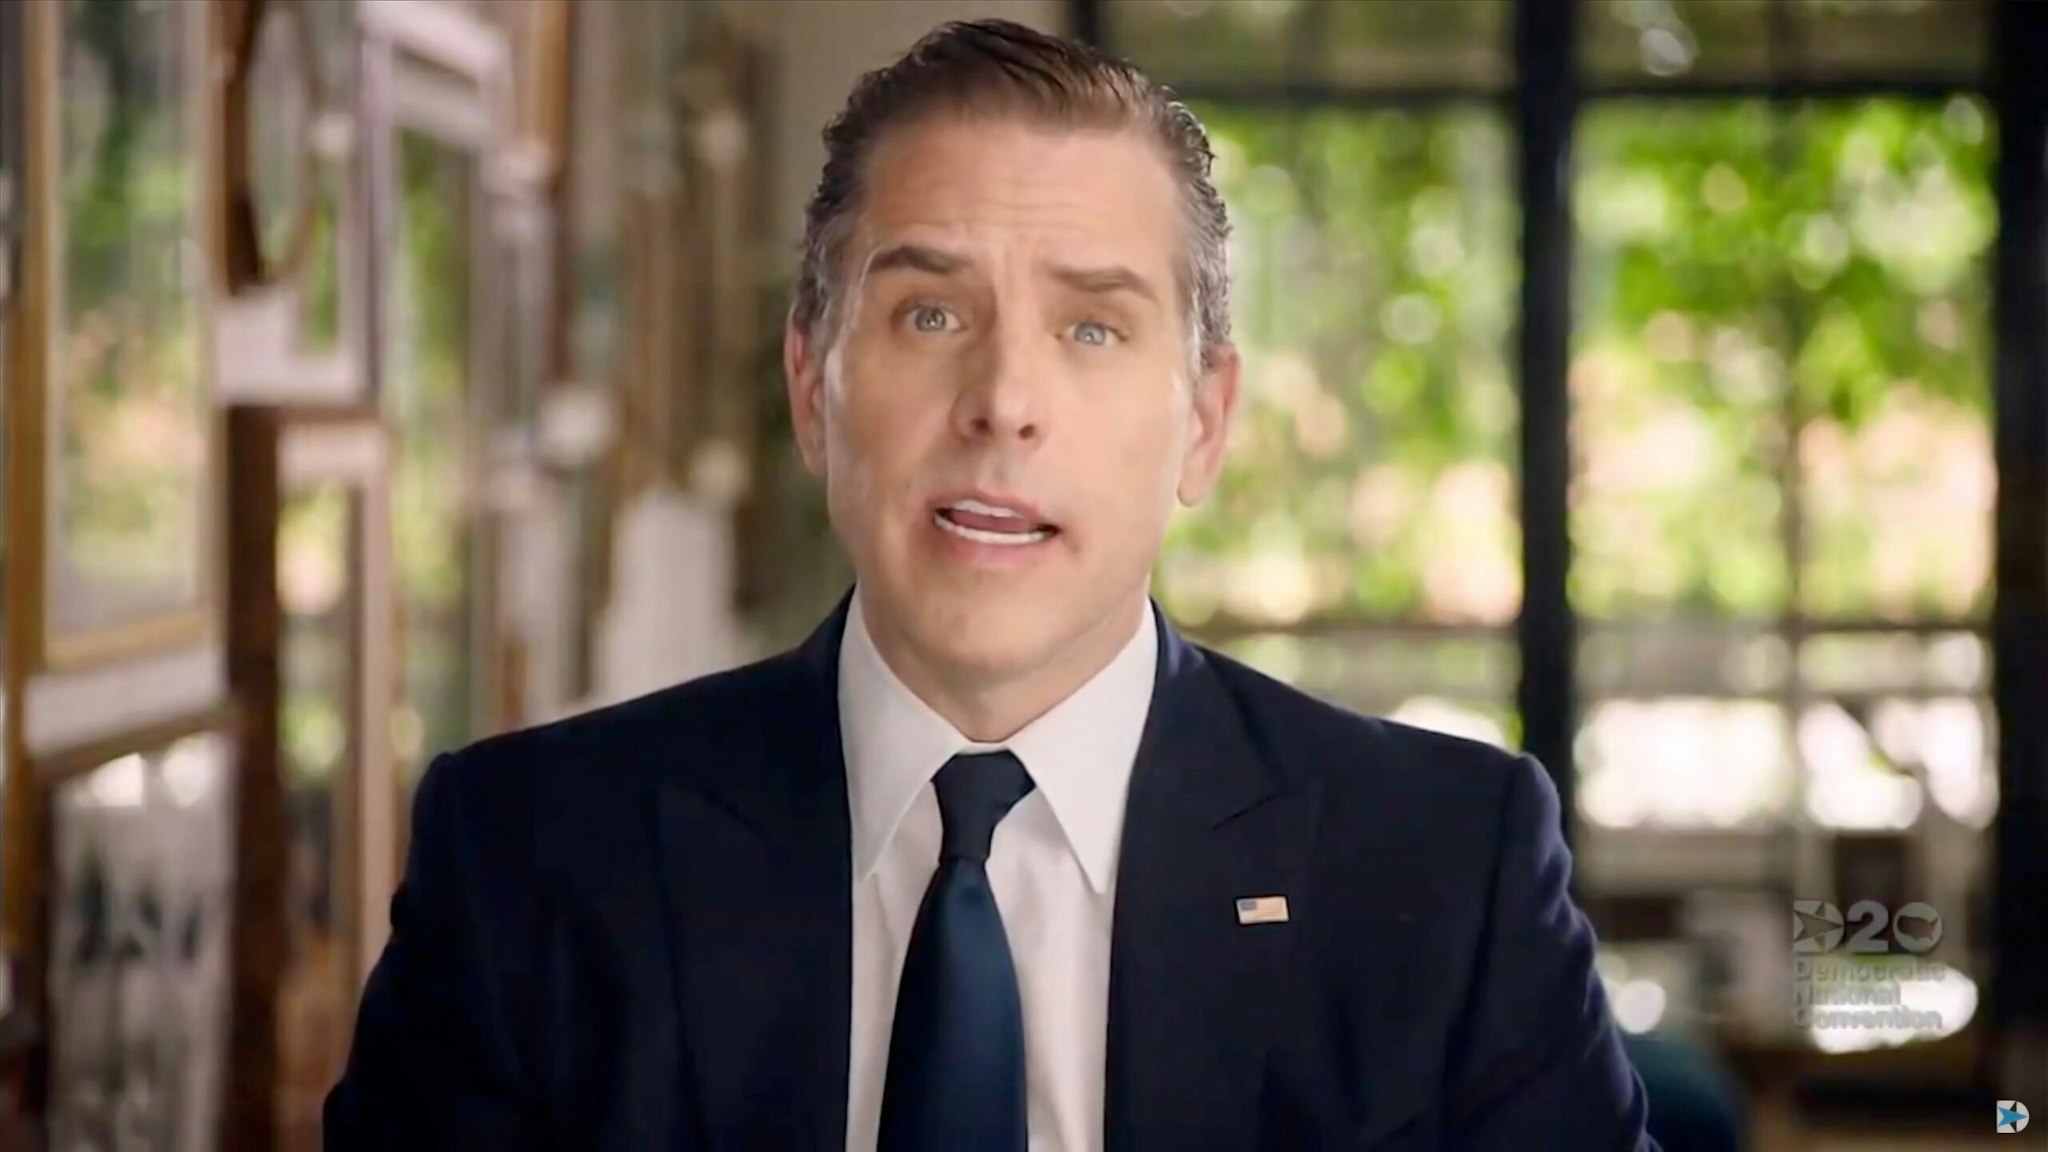 In this screenshot from the DNCC’s livestream of the 2020 Democratic National Convention, Hunter Biden, son of Democratic presidential nominee Joe Biden, addresses the virtual convention on August 20, 2020.